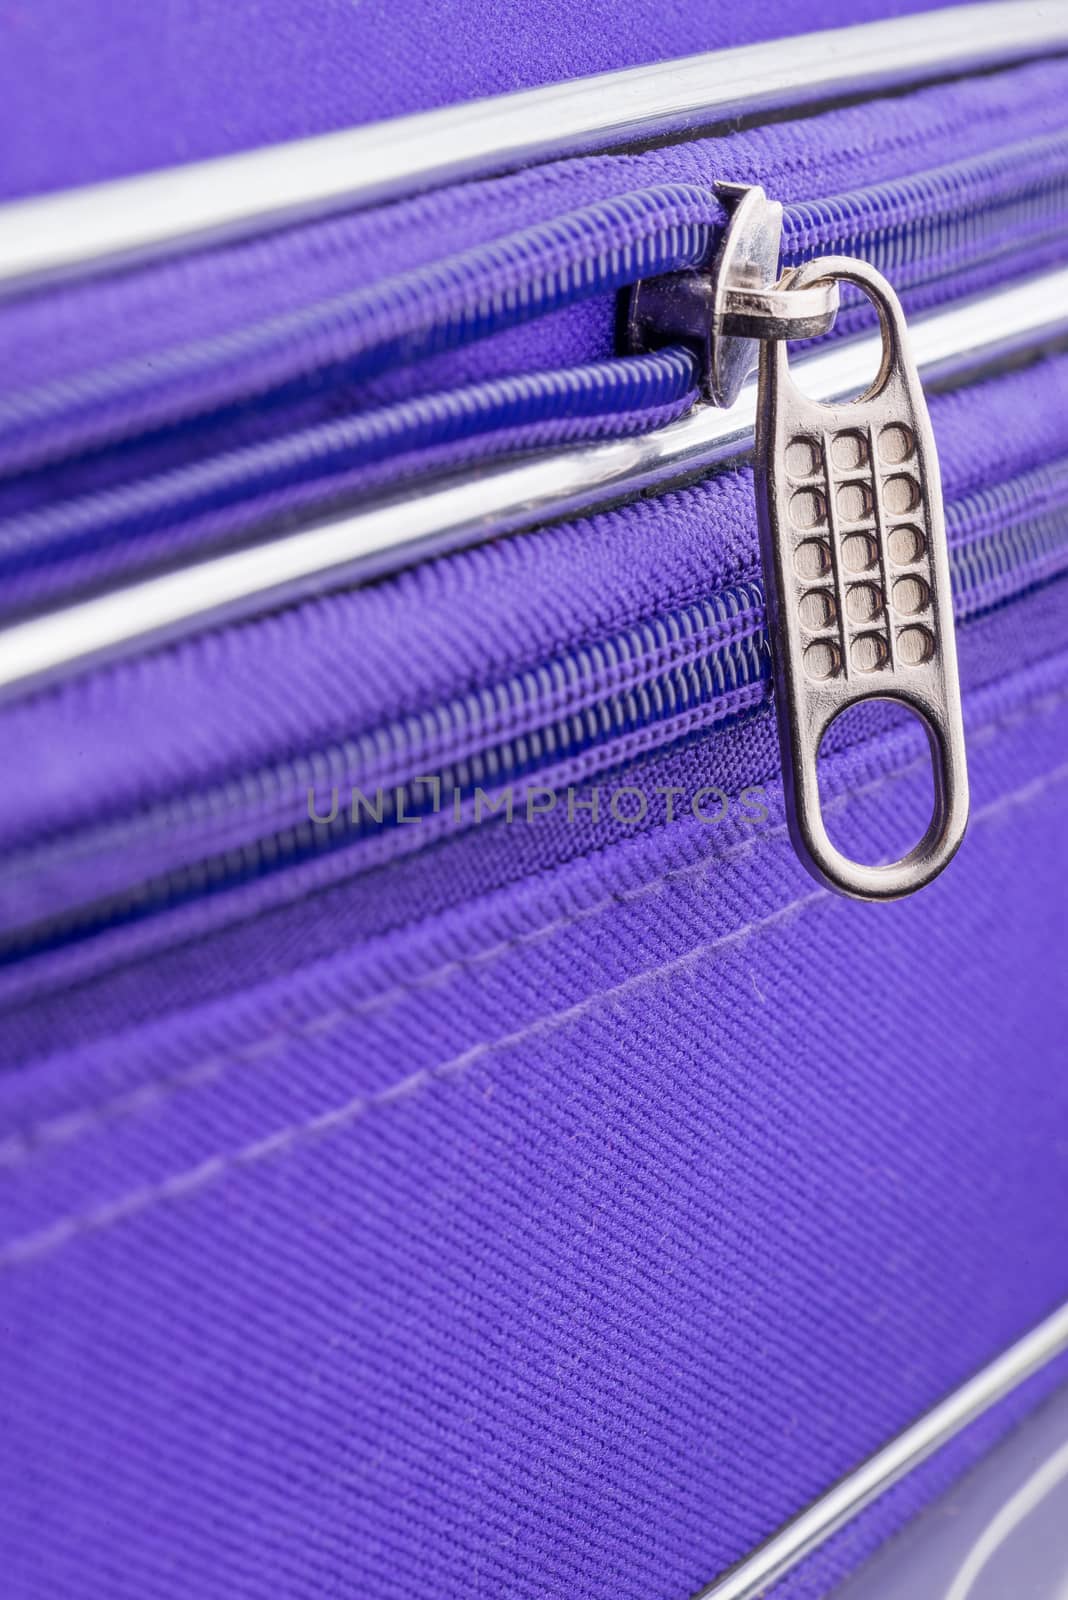 Pull Tab and Chain of a Zipper on a Violet Suitcase by MaxalTamor